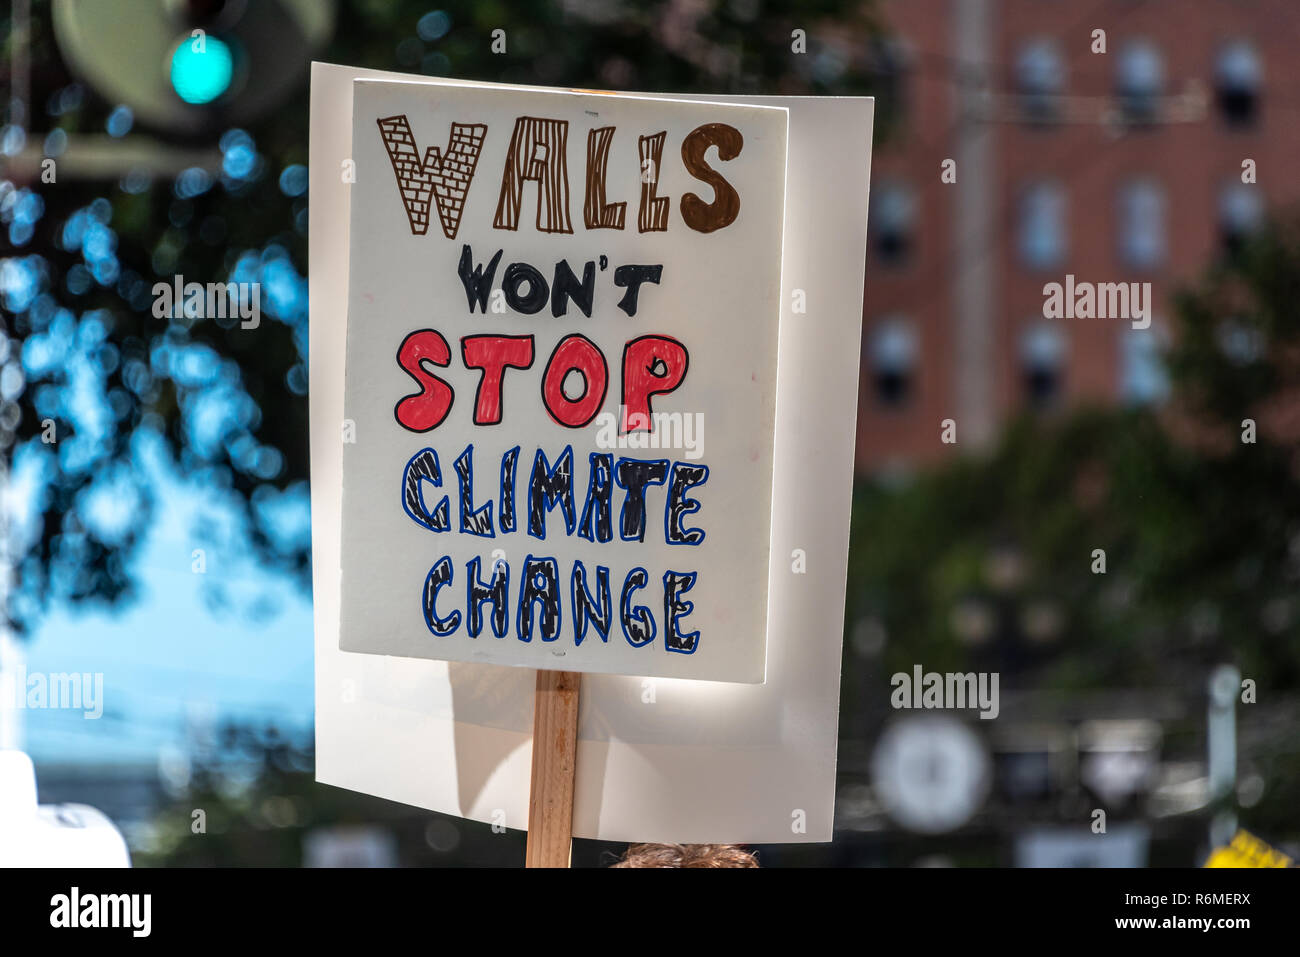 San Francisco, California, USA. 8th September, 2018. Thousands gather in San Francisco in Rise for Climate rally and march in advance of the Global Climate Action Summit to be held there September 12 to 14. A sign rises above the crowd reading 'Walls won't stop climate change' in reference to President Trump's proposed border wall project. Stock Photo